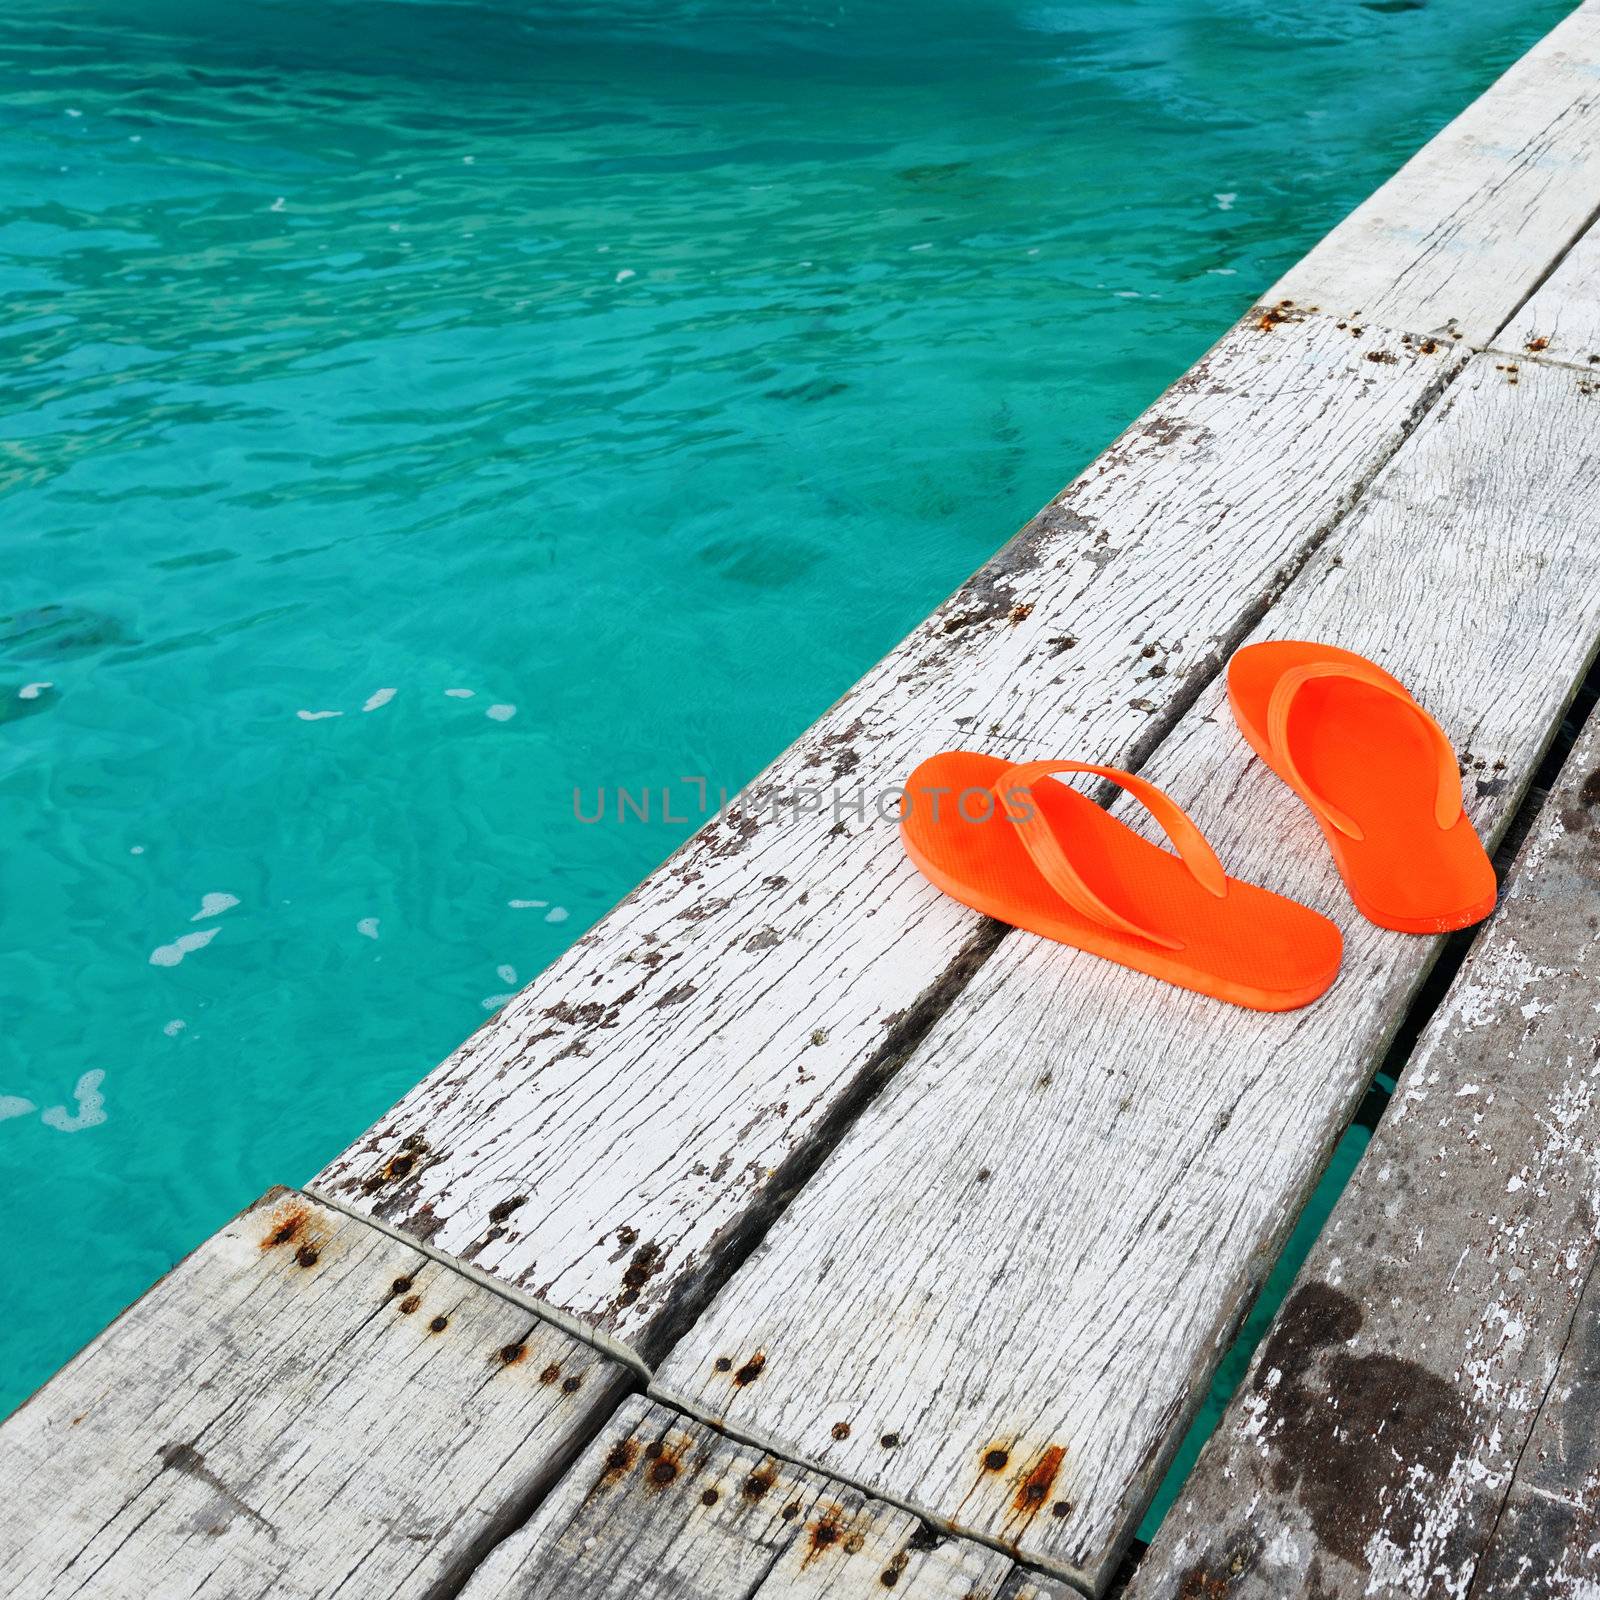 Sandals at jetty by haveseen